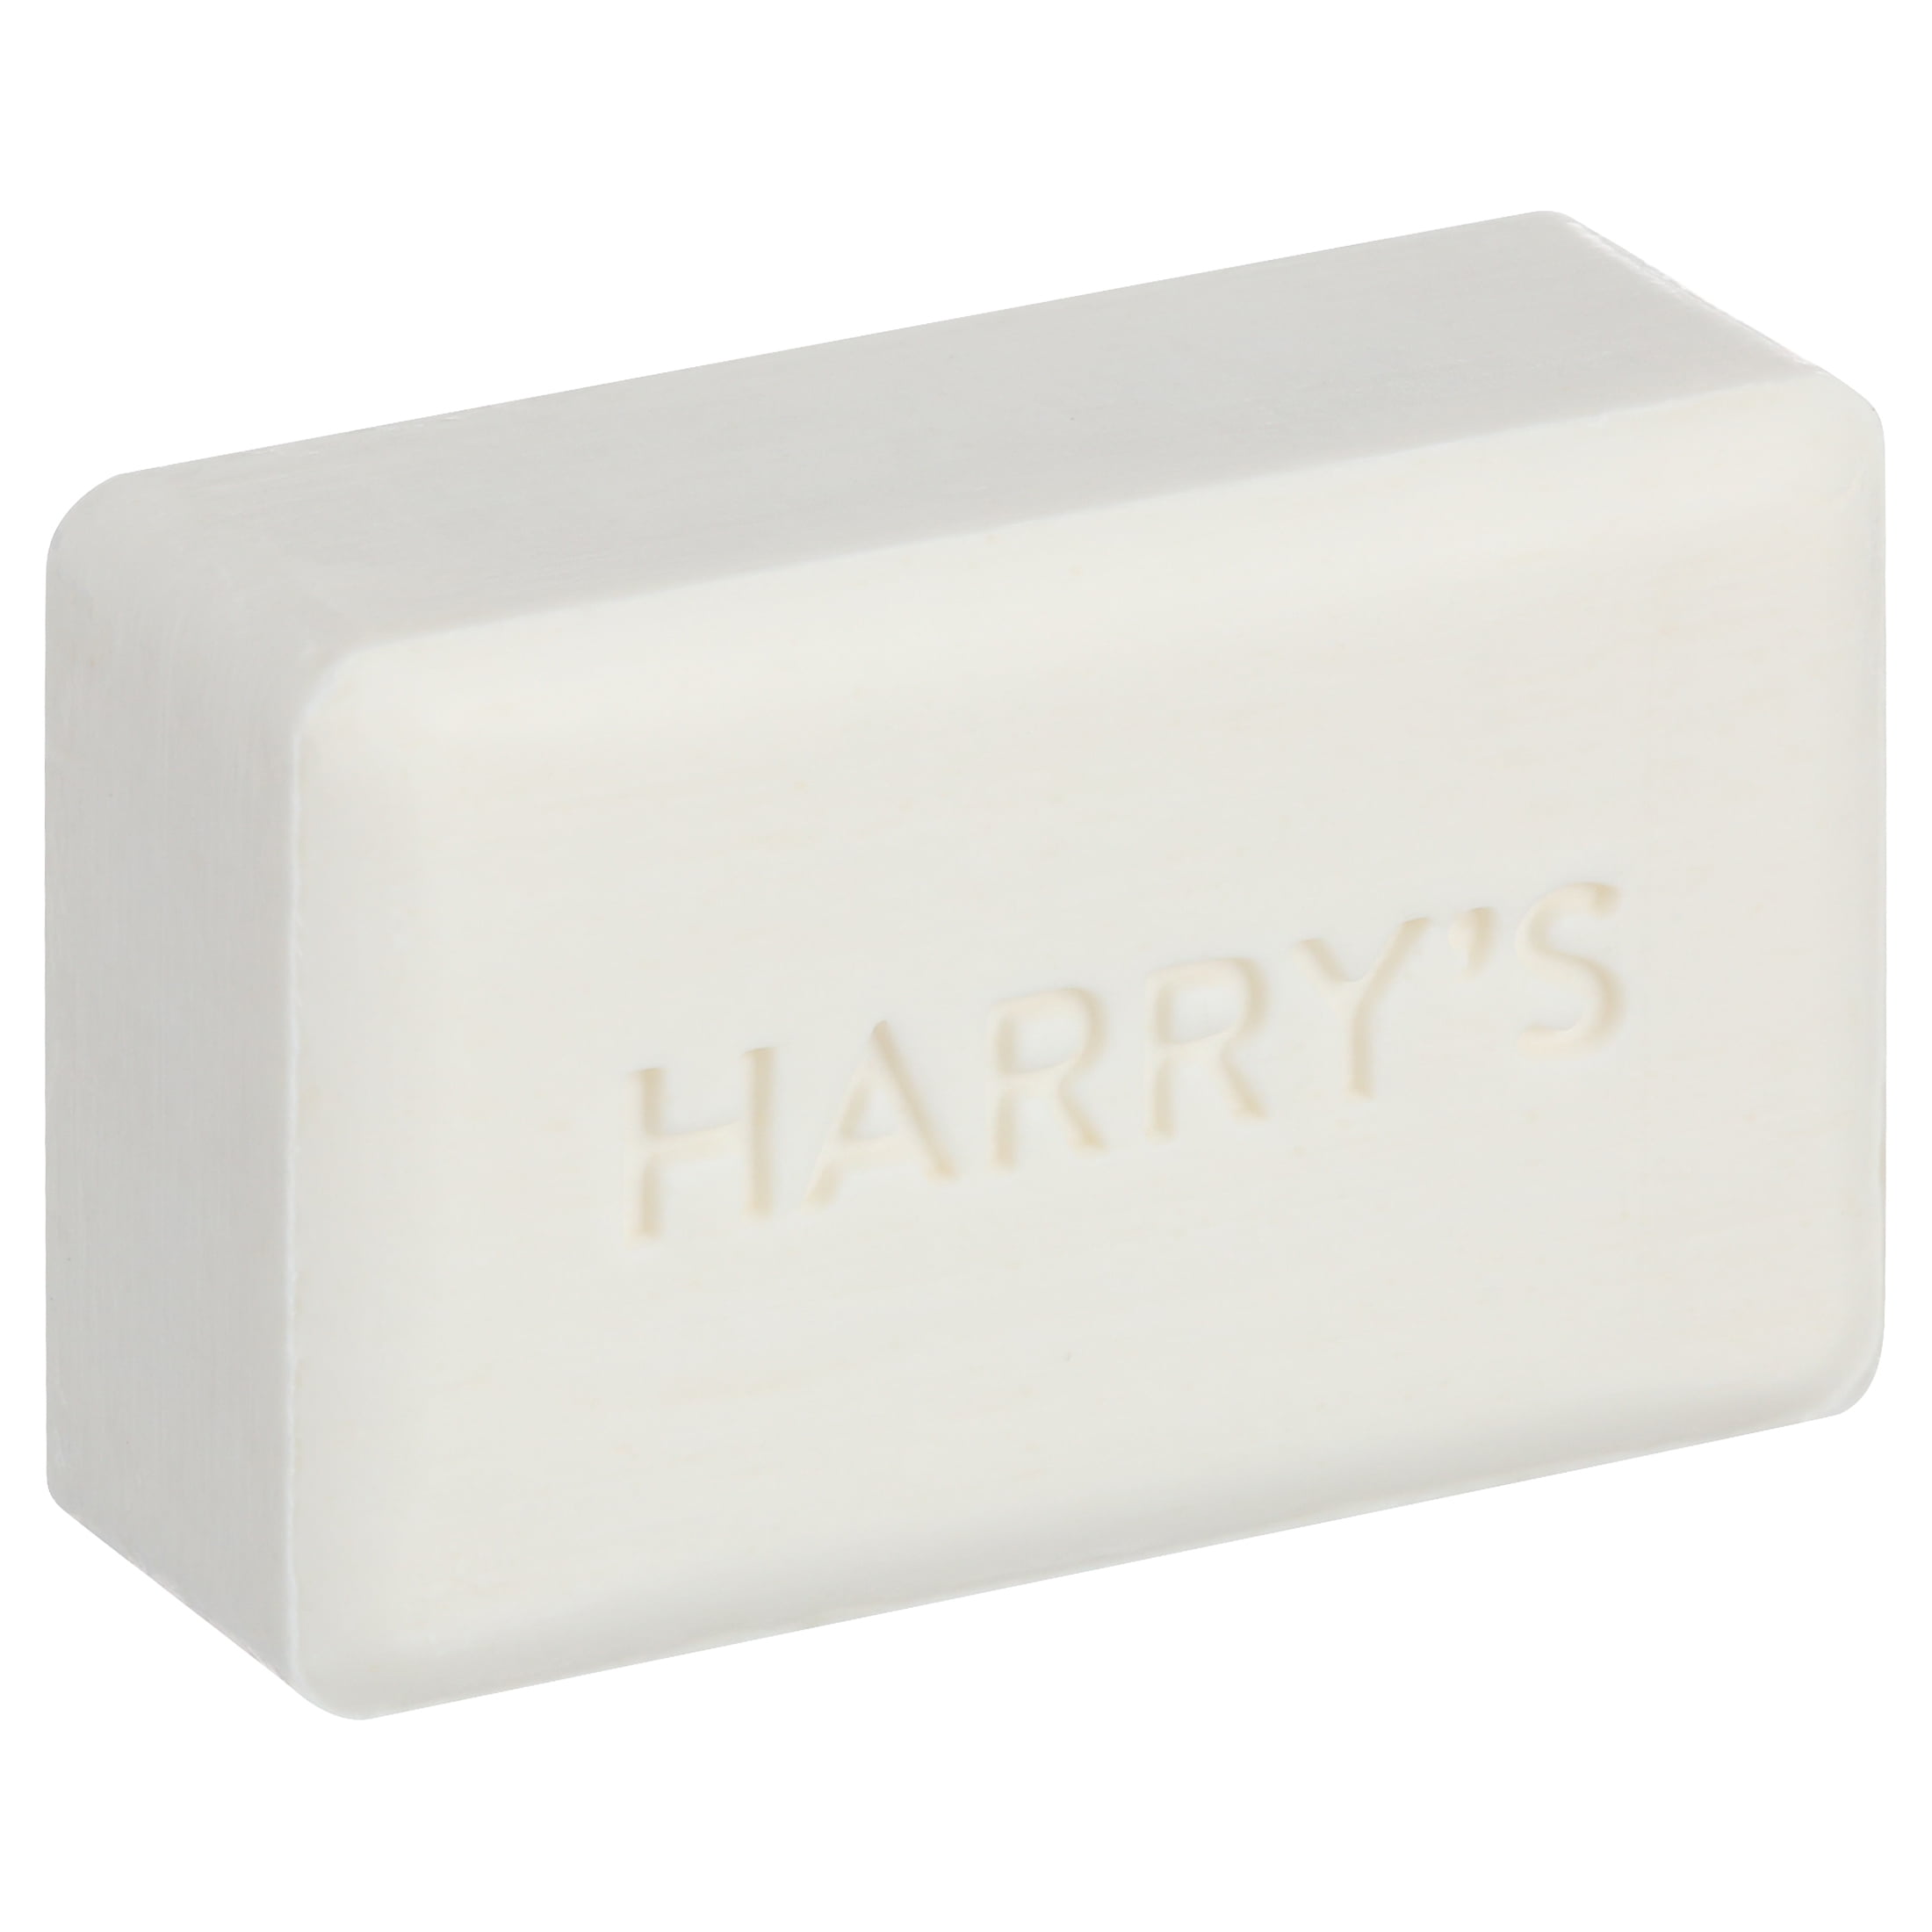 HARRY'S Shiso Sustainable Palm Oil Bar Soap 5 oz Fresh Herbs (New) 